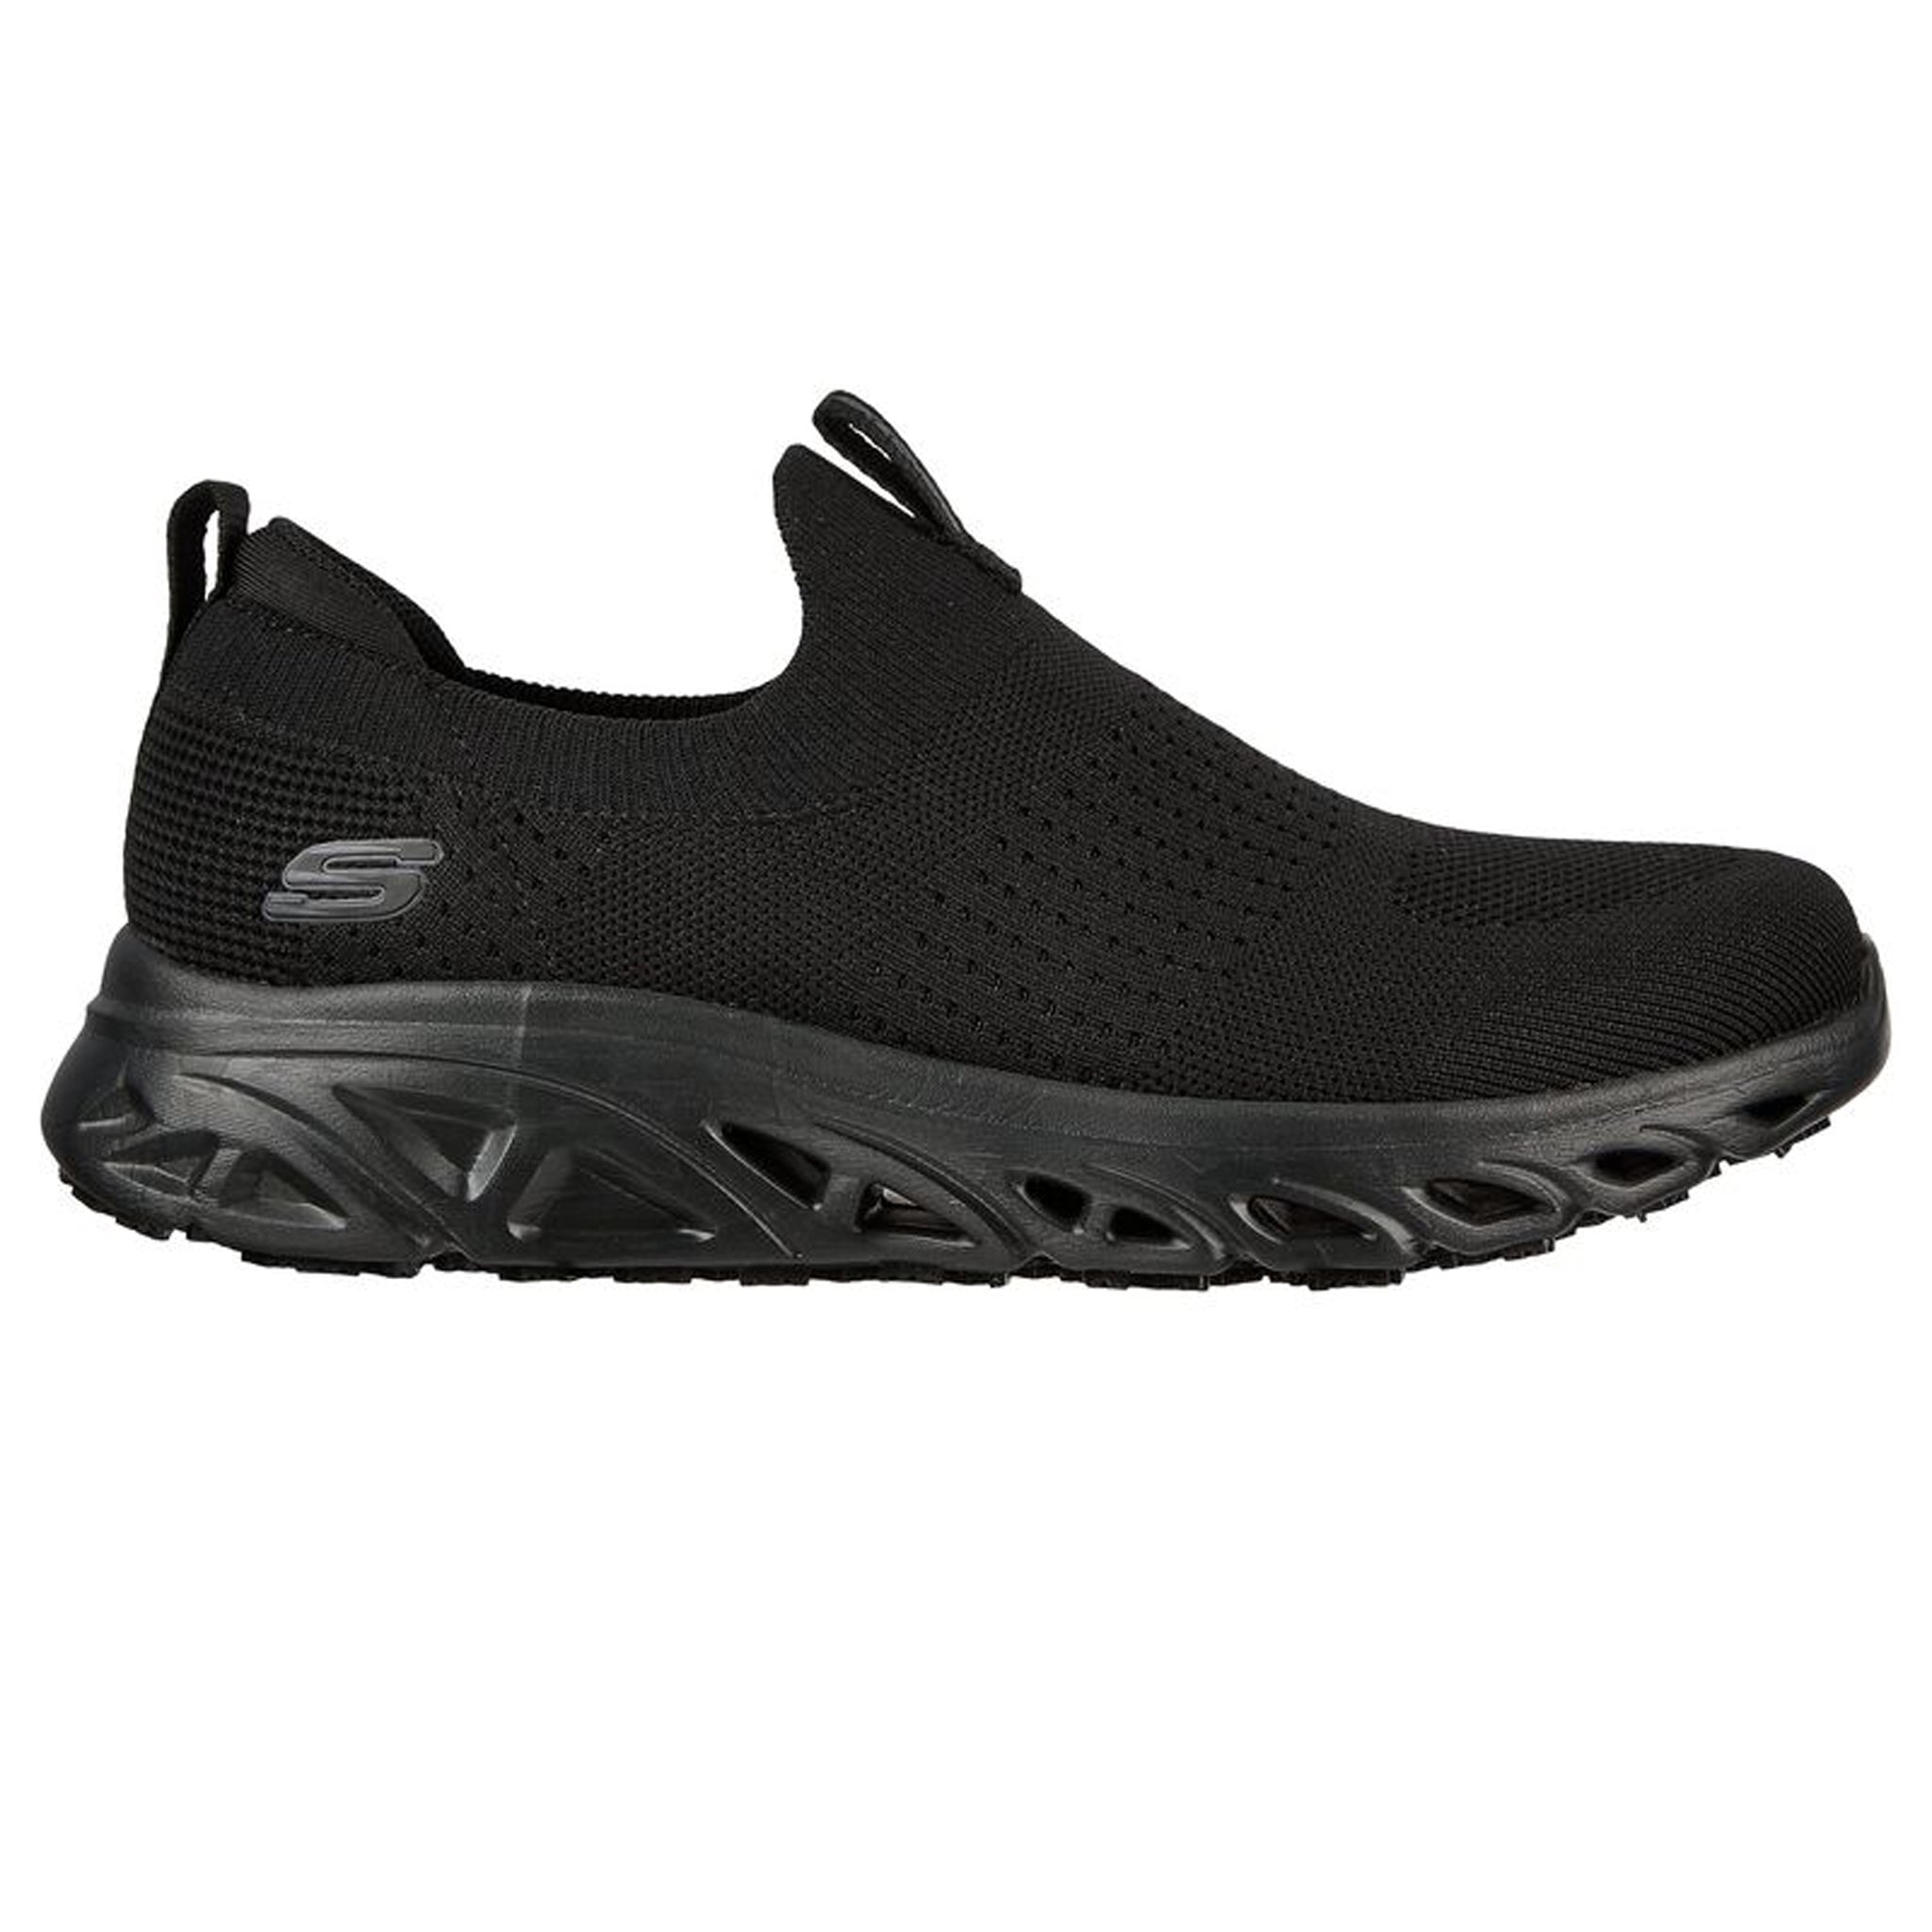 Skechers Women's 108056 Work Fit: Glide-Step SR - Elloween Wor – That Shoe Store and More